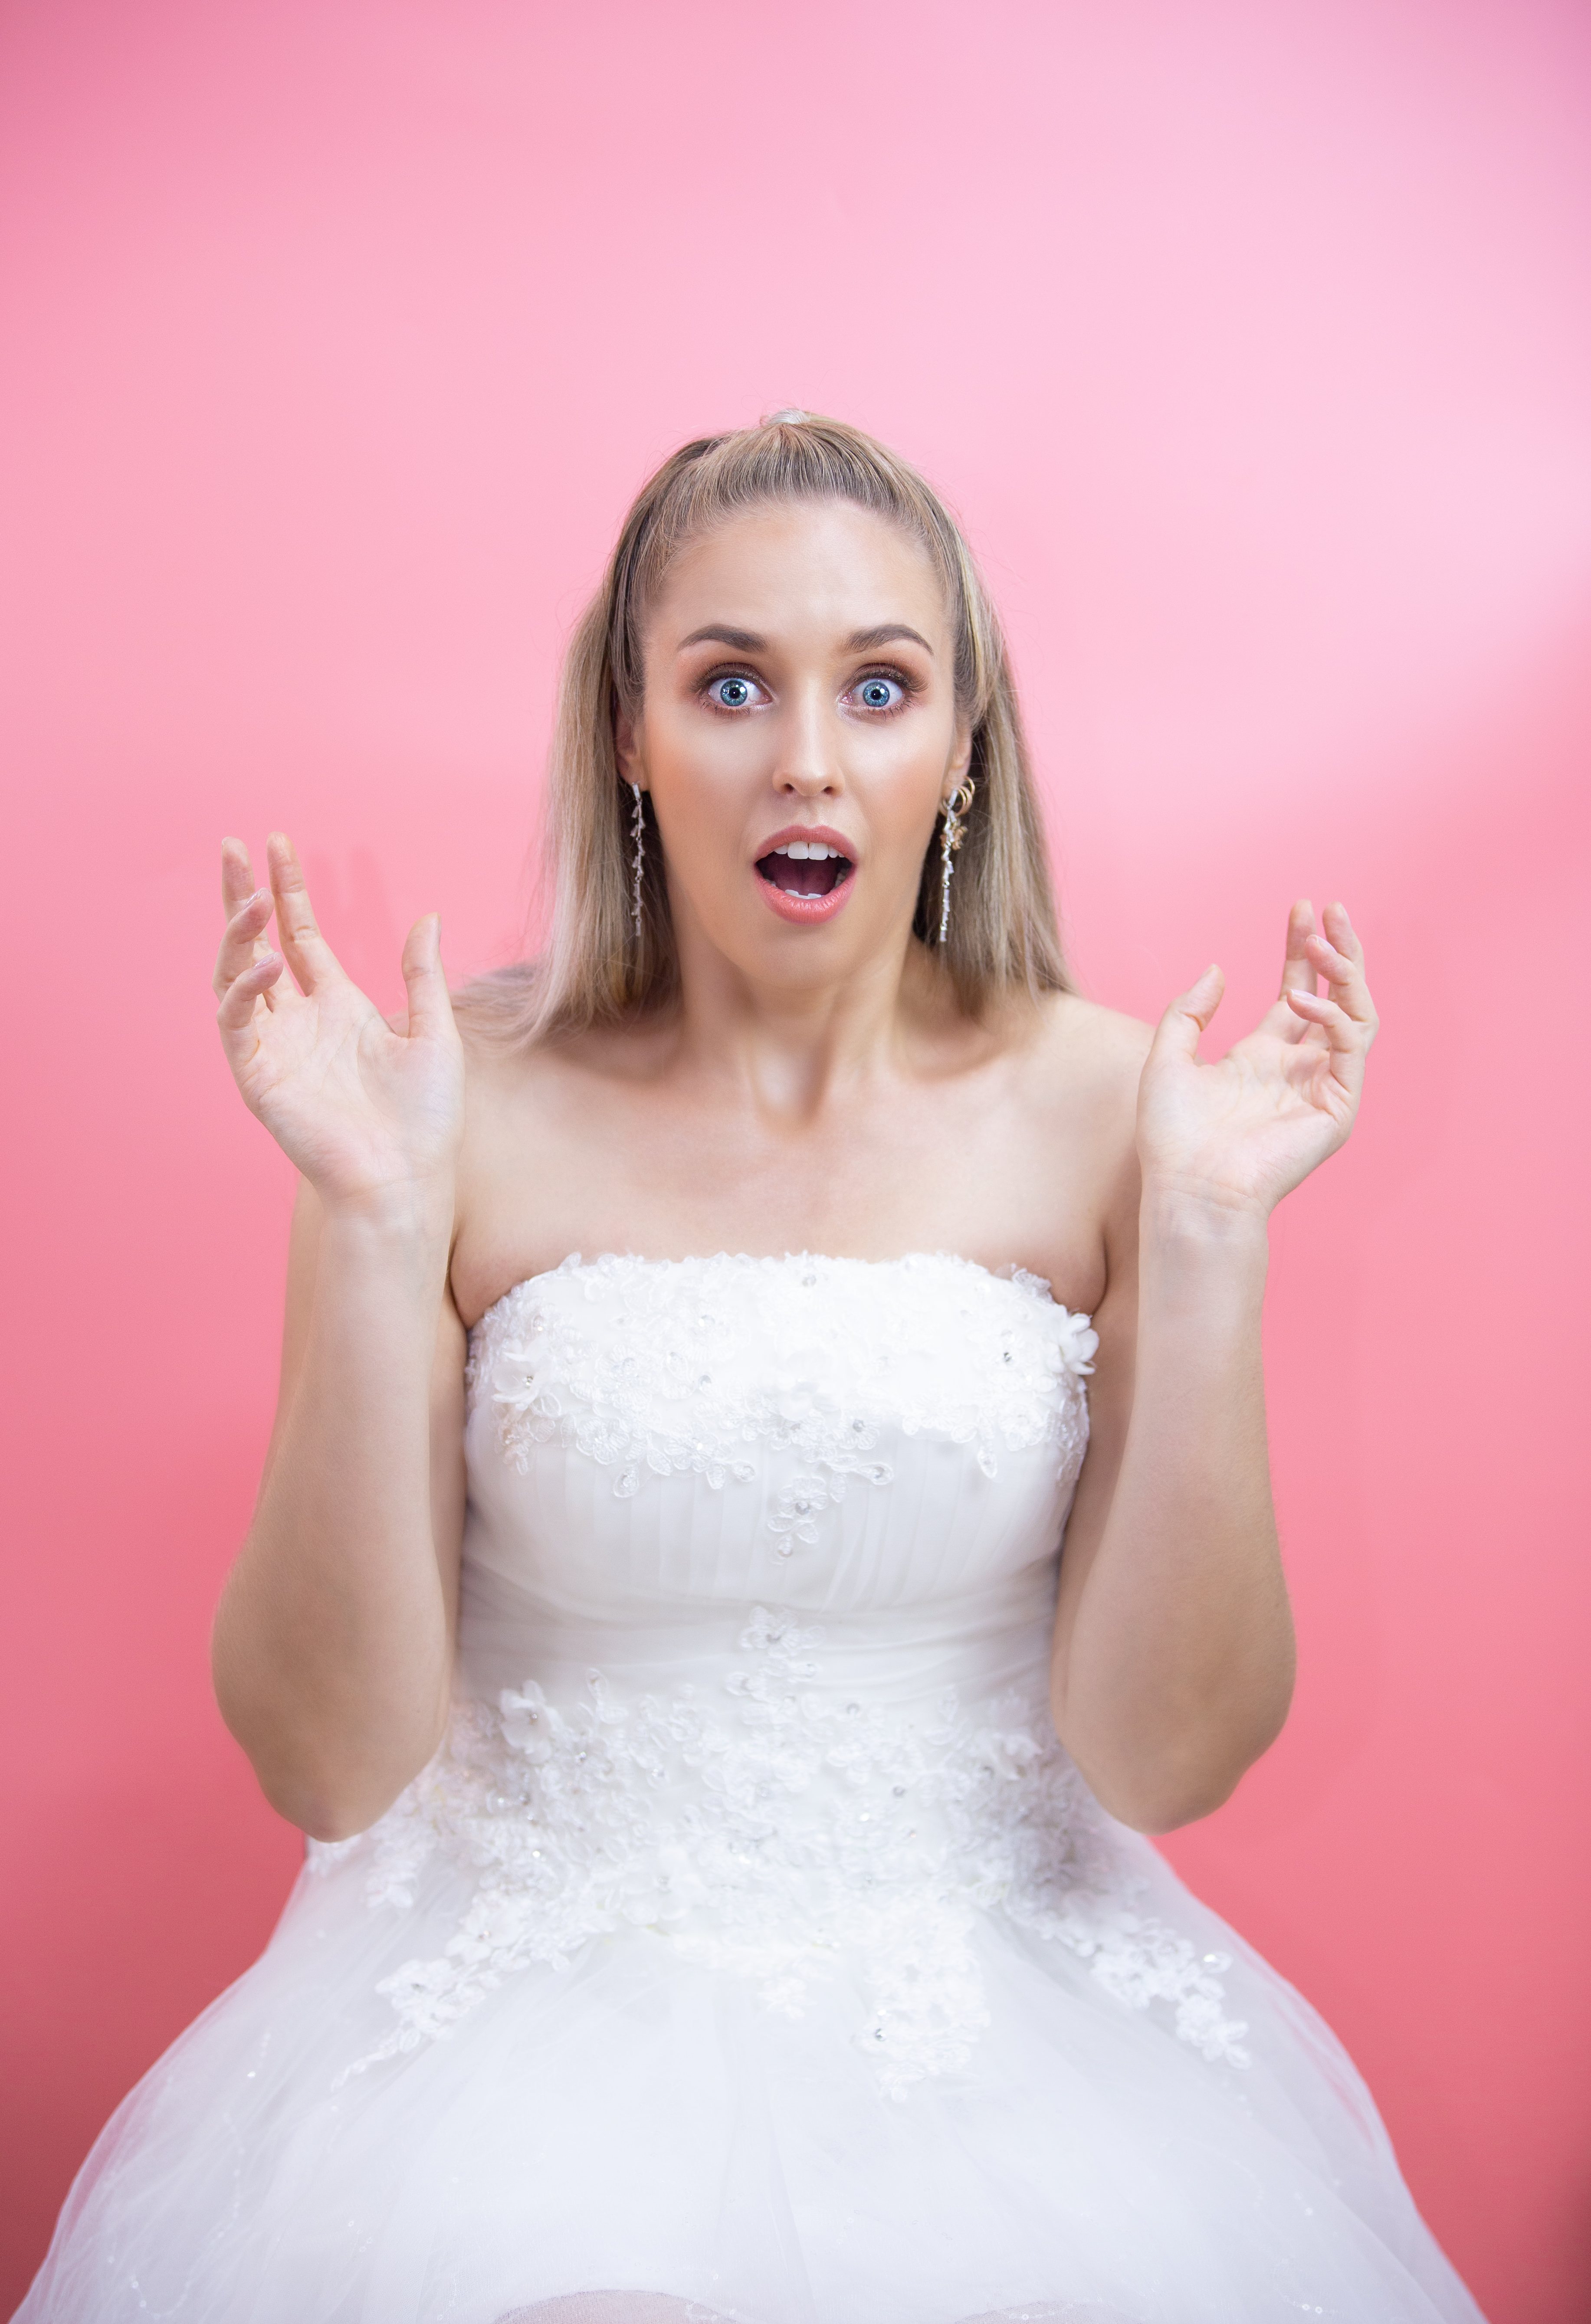 Shocked bride | Source: Getty Images